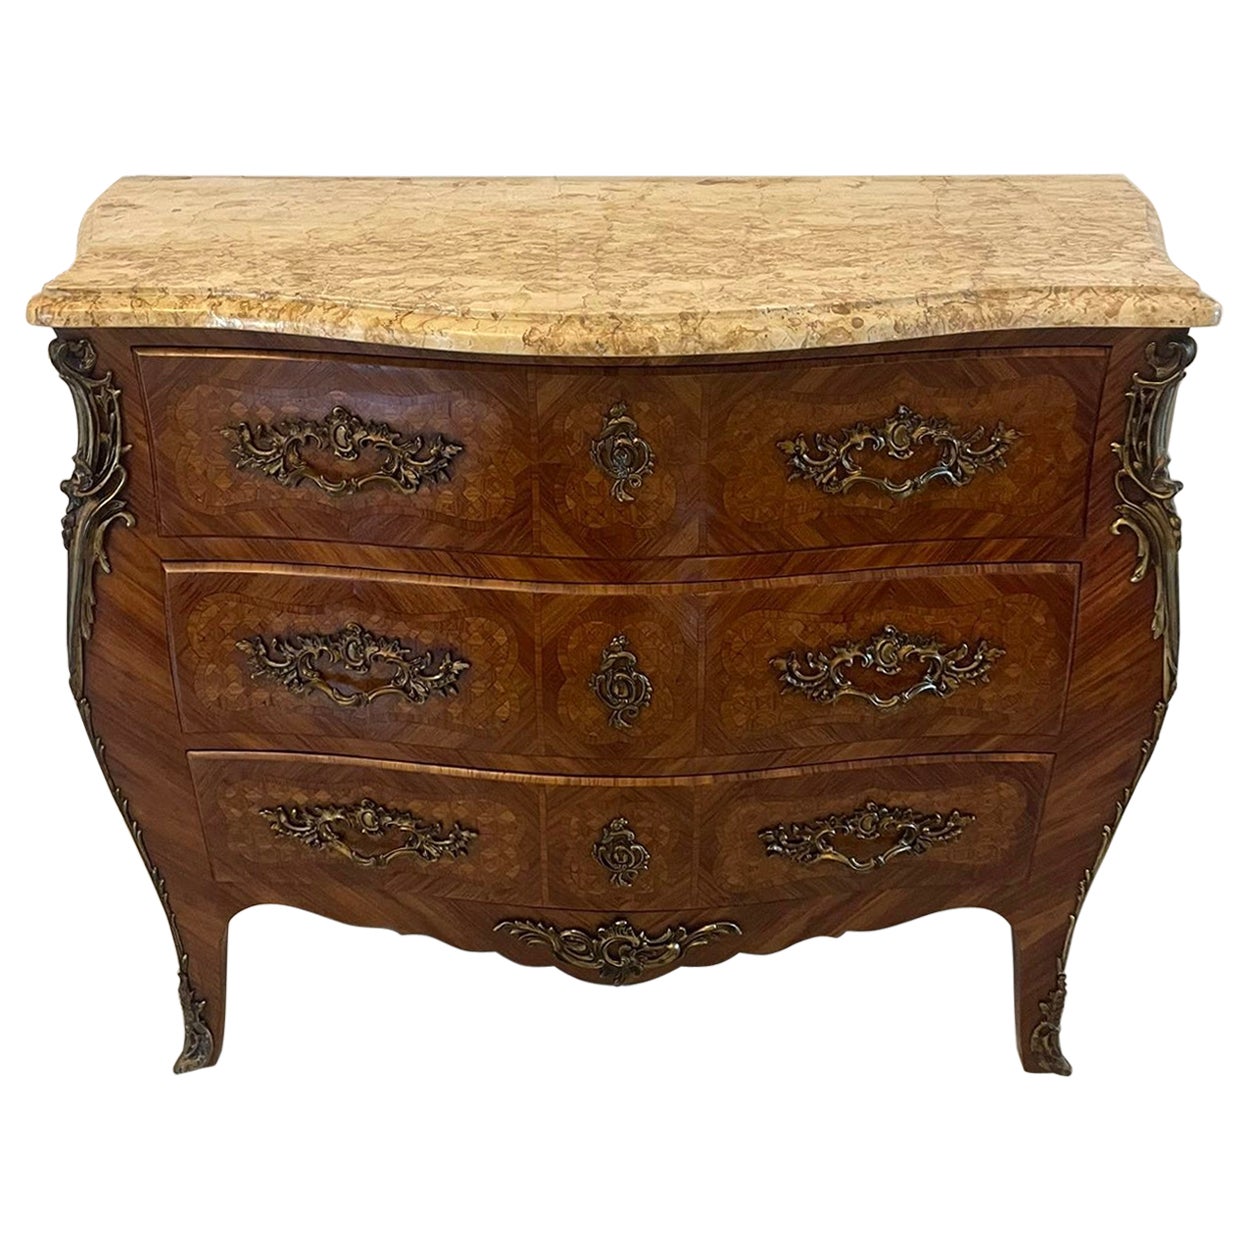 Antique Victorian Quality French Parquetry Marble Top Commode Chest of Drawers For Sale